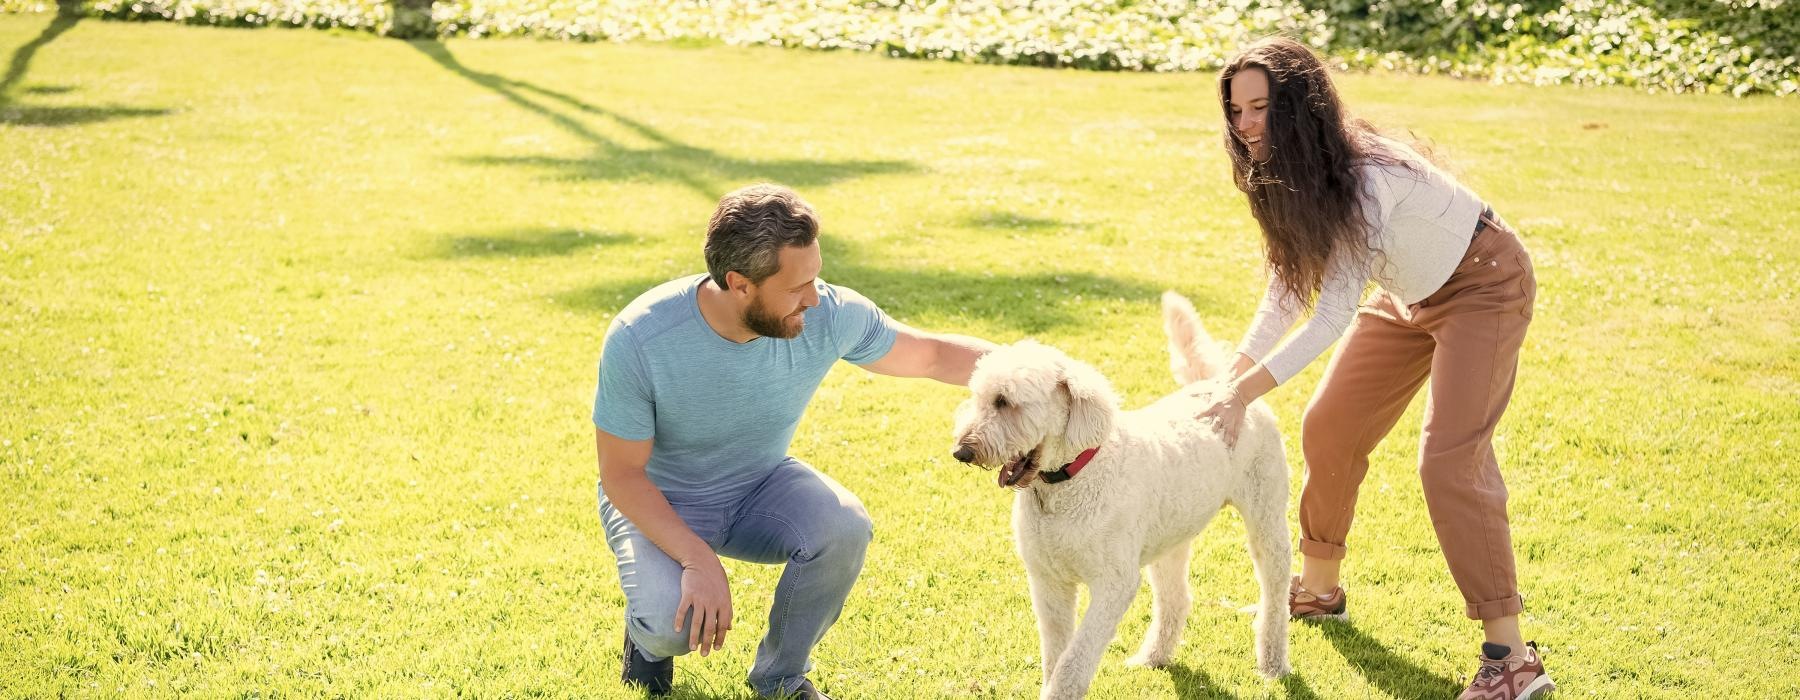 a man and a woman playing with a dog in a grassy area